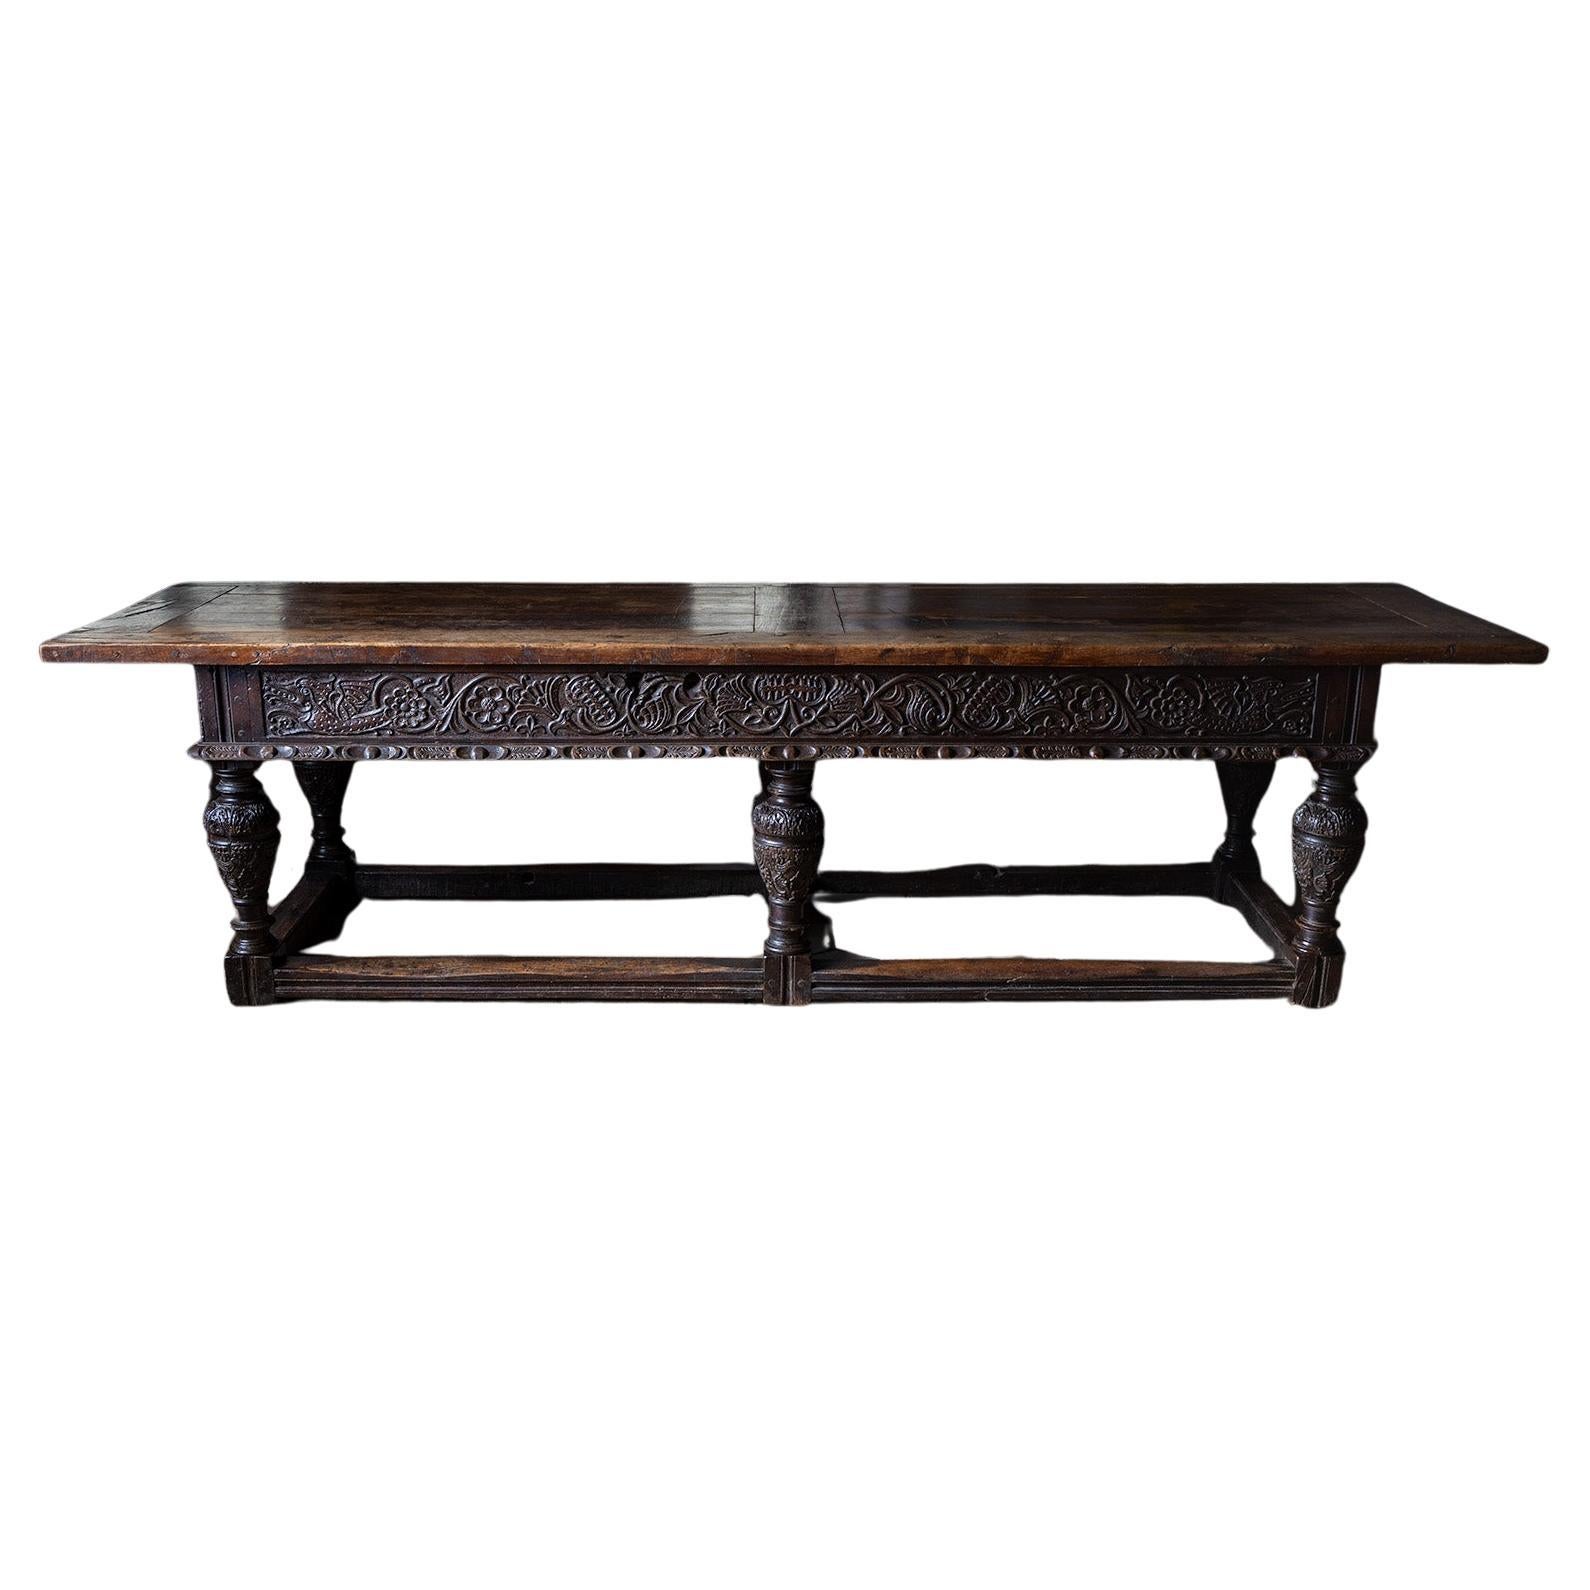 Large Refectory Dining Table, 18/19th Century